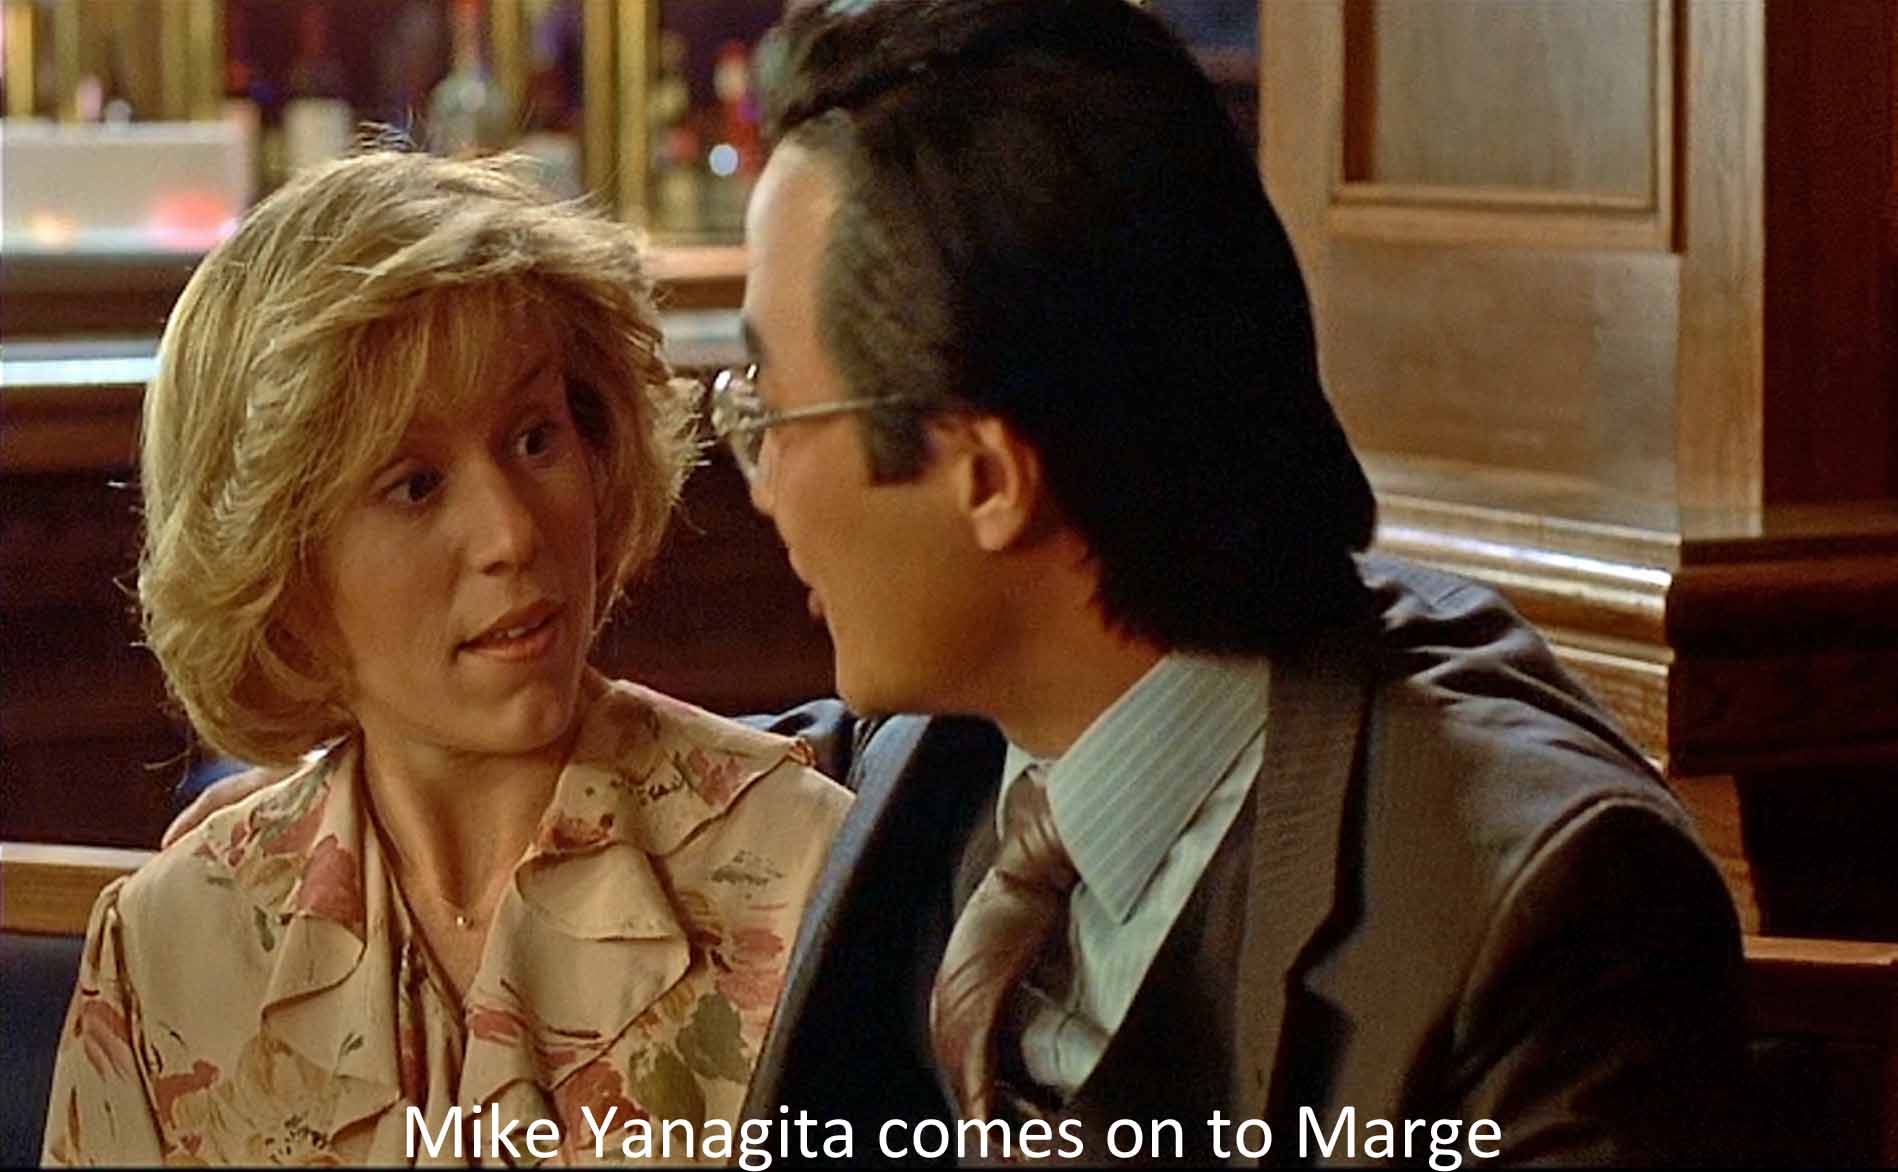 Mike Yanagita comes on to Marge